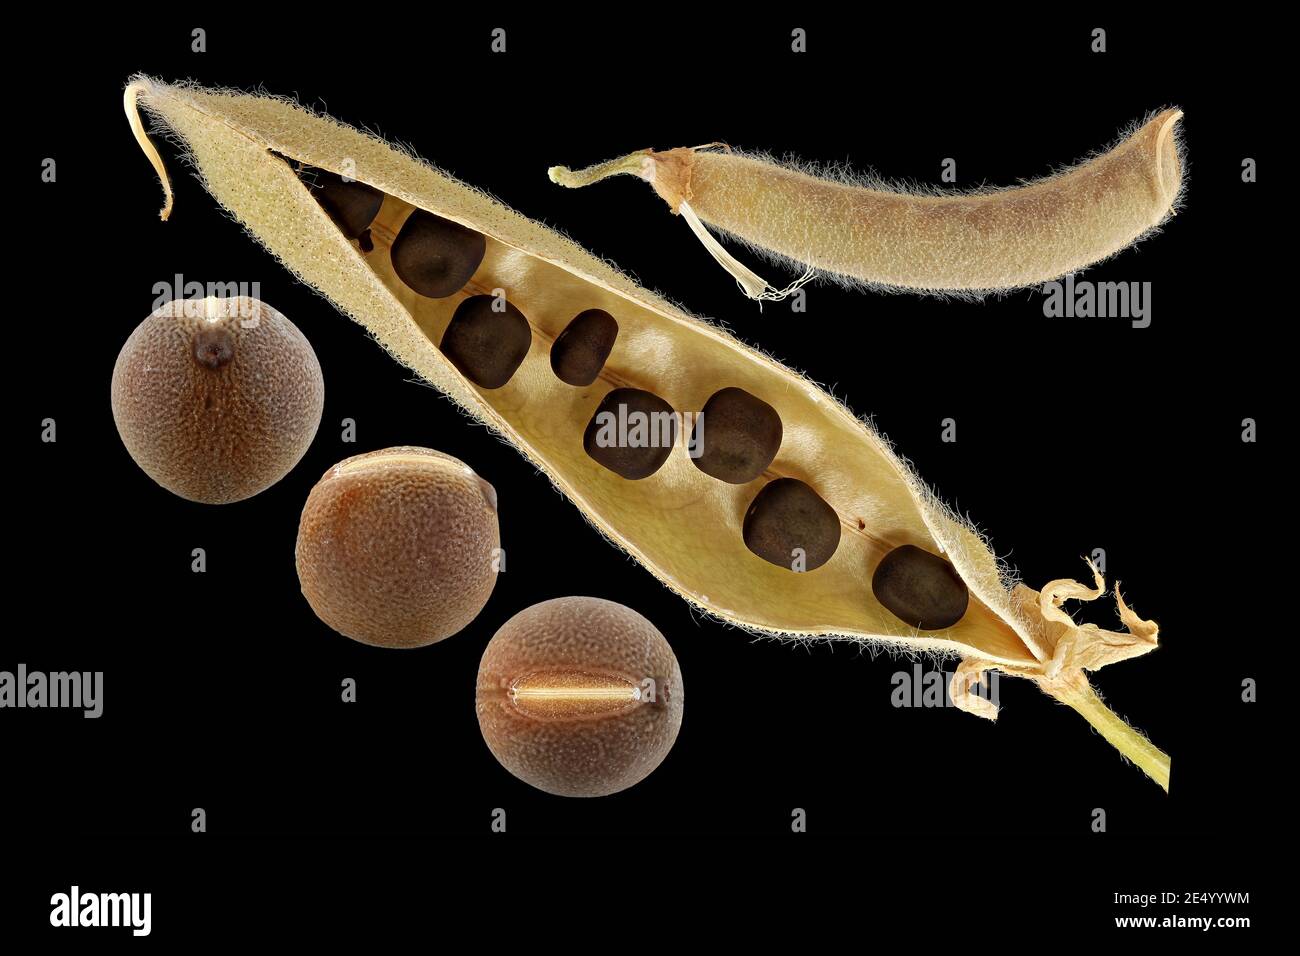 Lathyrus odoratus, Sweet pea, Duftende Platterbse, close up, fruits and seeds, seed pod Stock Photo